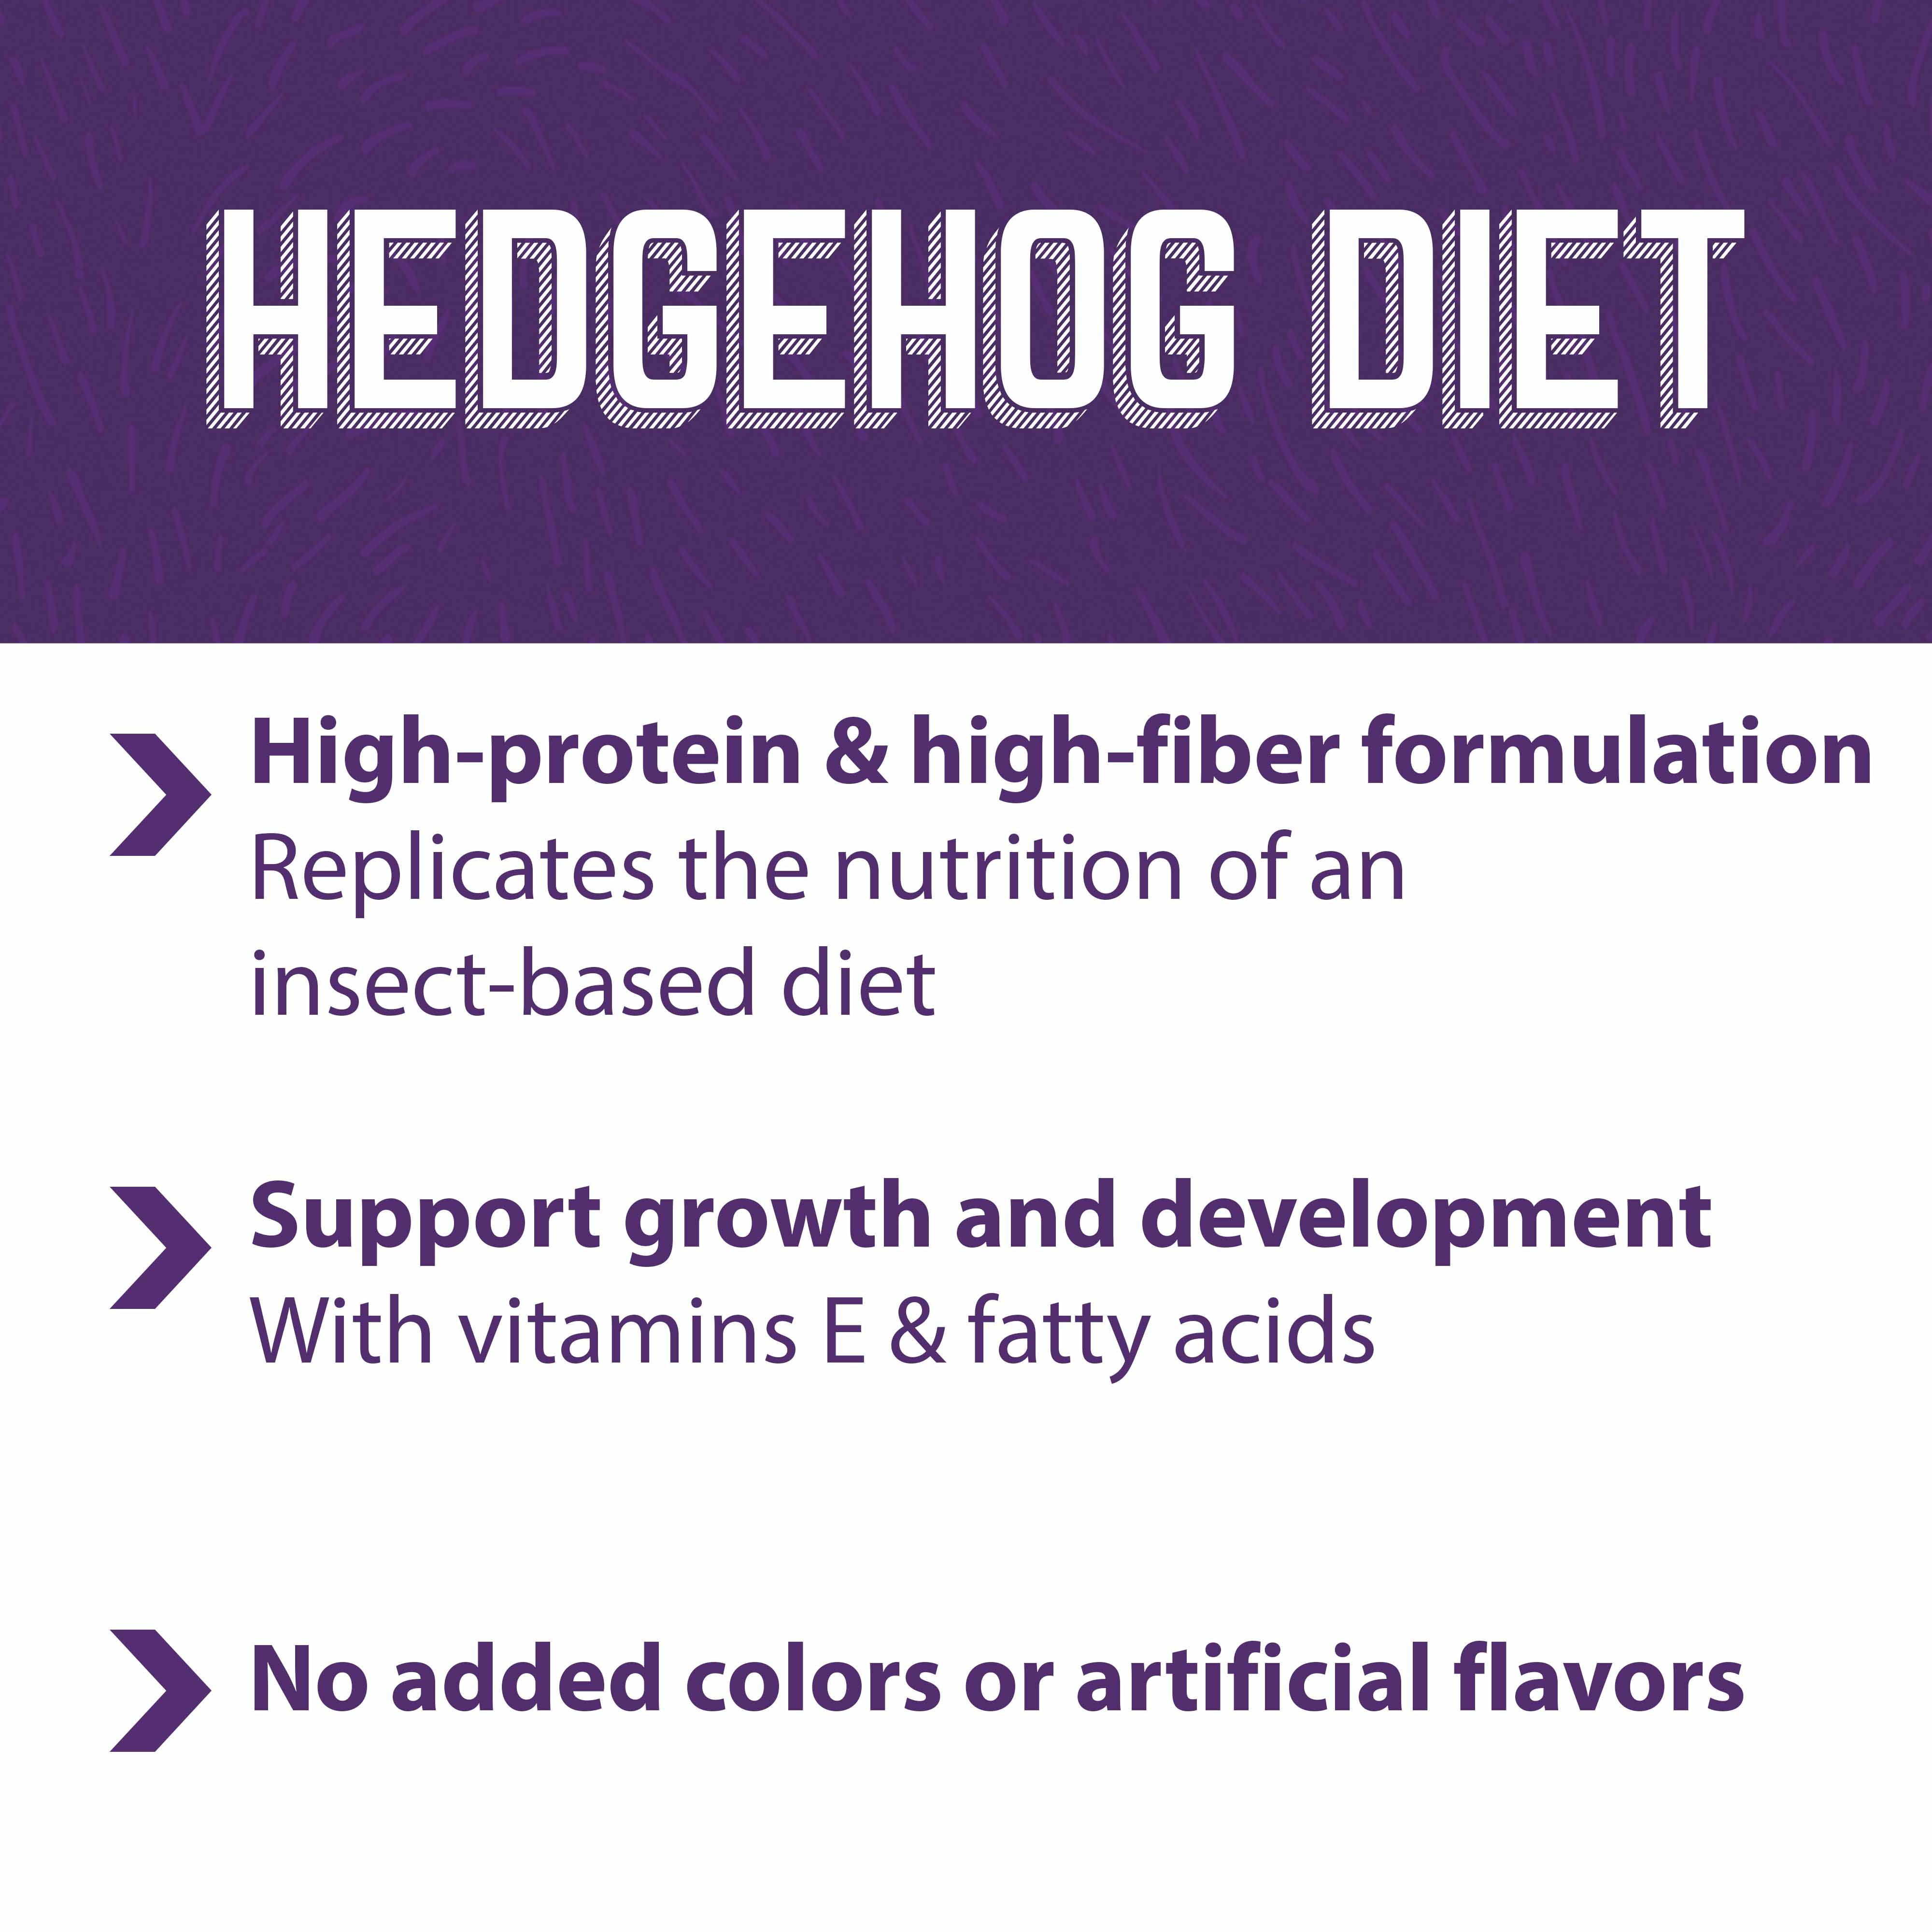 hedgehog diet is high in protein and fiber